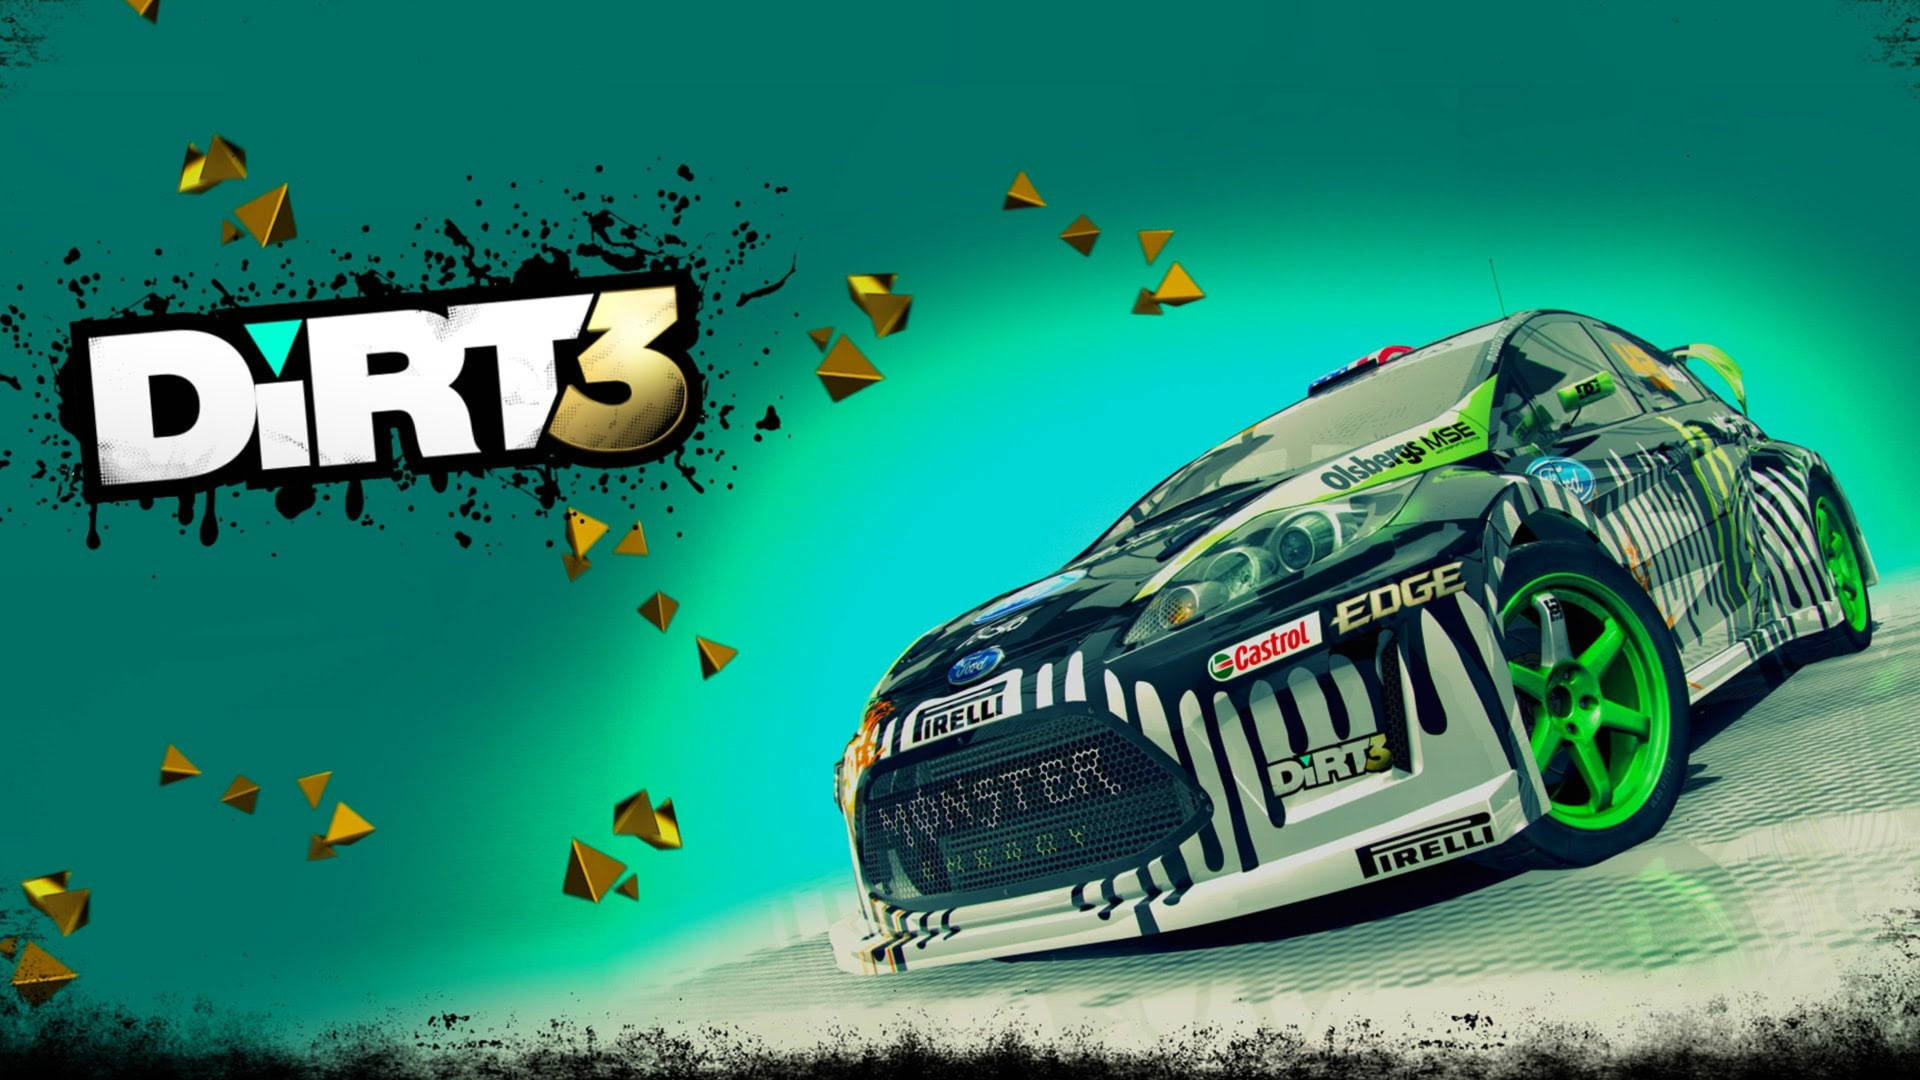 Dirt 3 Logo And Ford Model Background